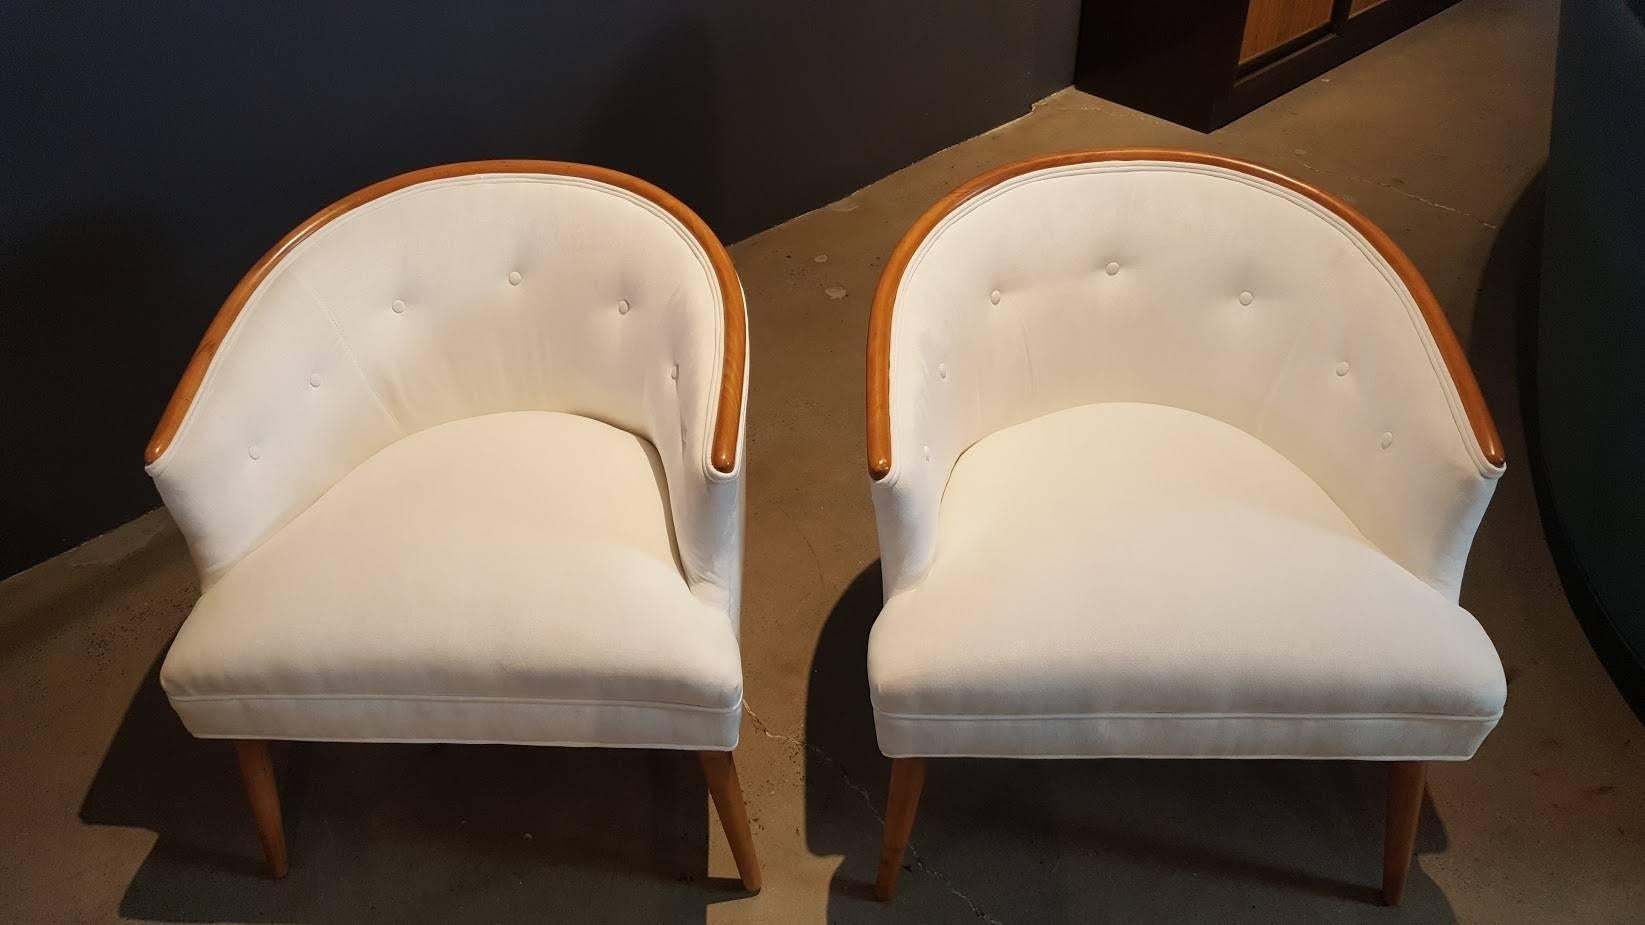 Sculptural, comfortable pair of Mid-Century Modern occasional chairs in the style of Harvey Probber or Paul McCobb. These have been fully restored with new foam and are reupholstered in a white cotton velvet. Mahogany band and splay legs have been